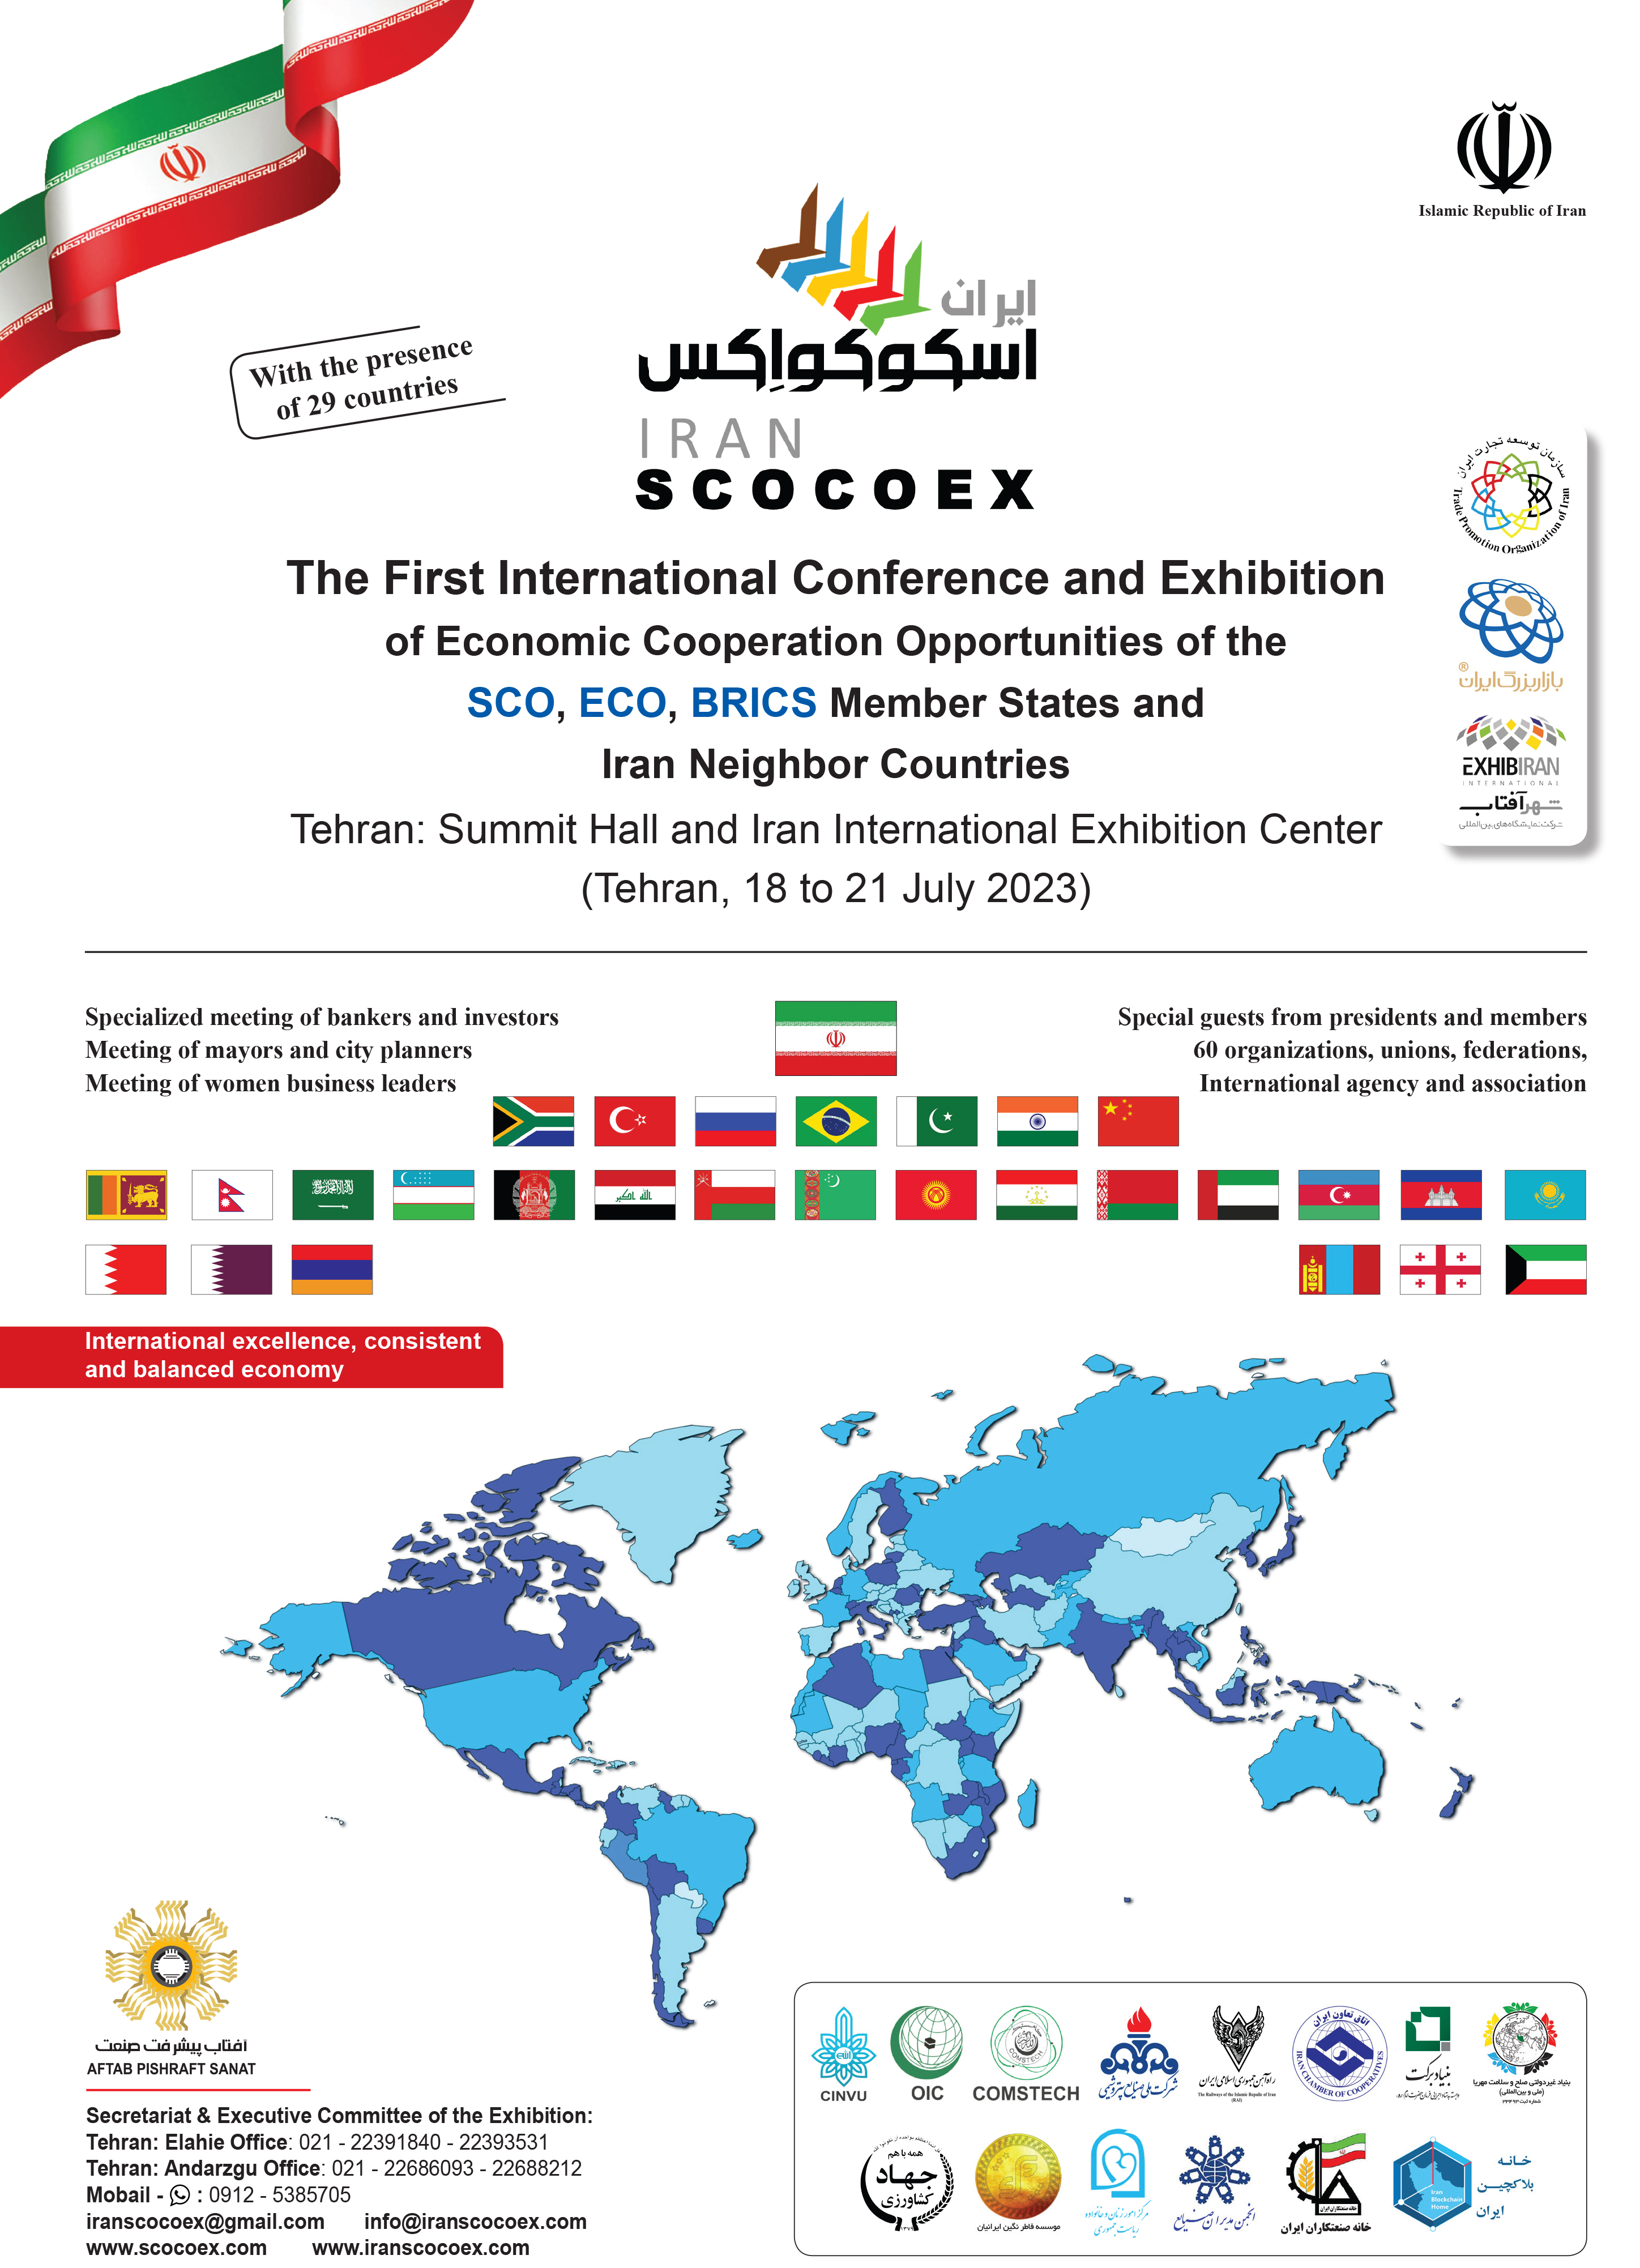 The IRANSCOCOEX Economic Cooperation Opportunities Conference And Exhibition